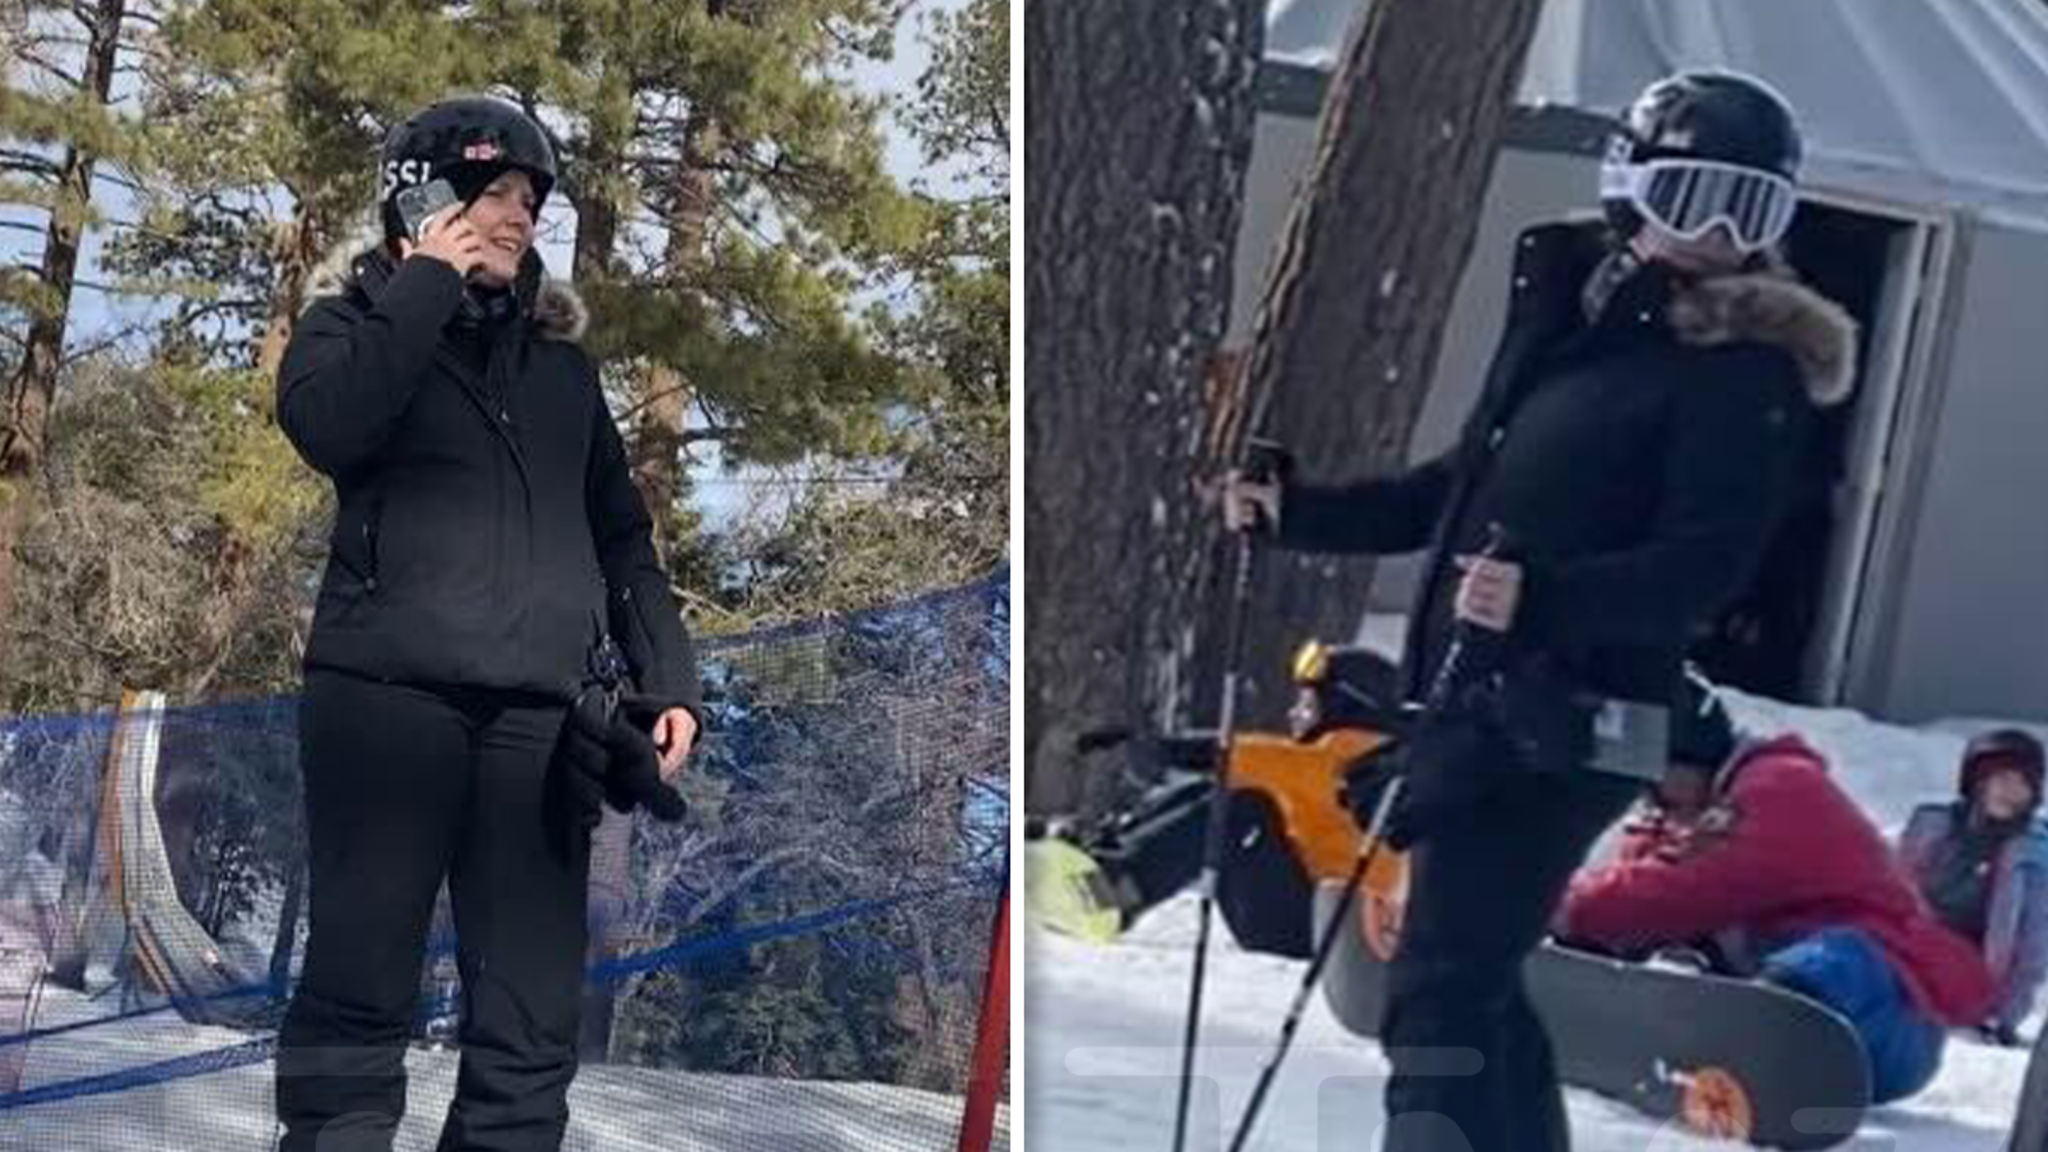 Amy Adams goes skiing with her husband and daughter in Southern California